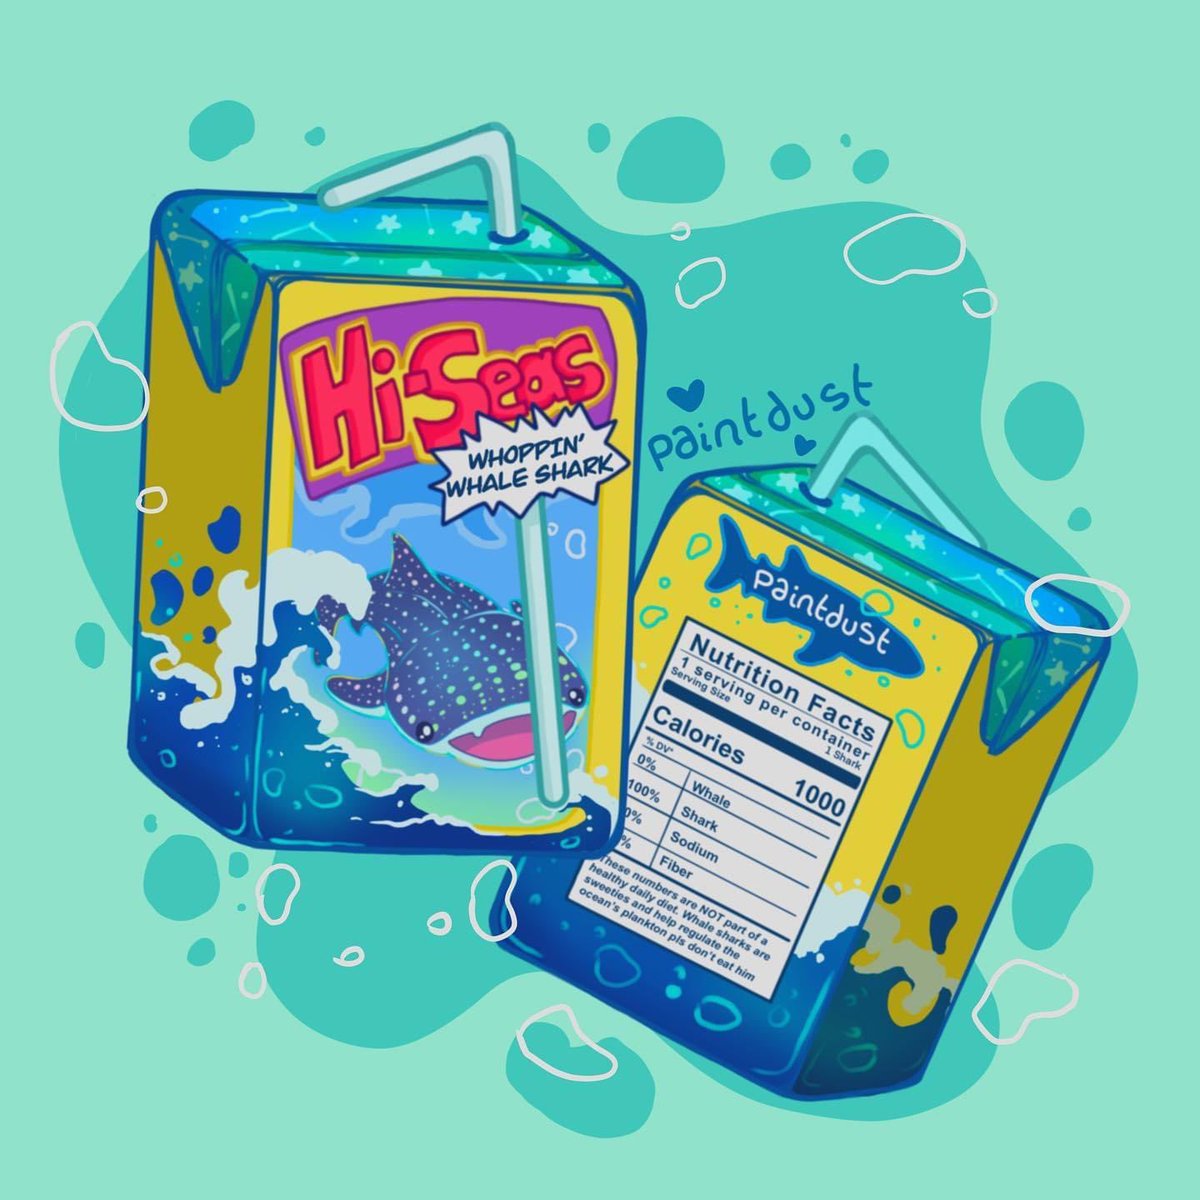 I heard it is #SharkAwarenessDay and therefore I’d like to remind you that sharks are cute and cool and neat with this juice box design I created